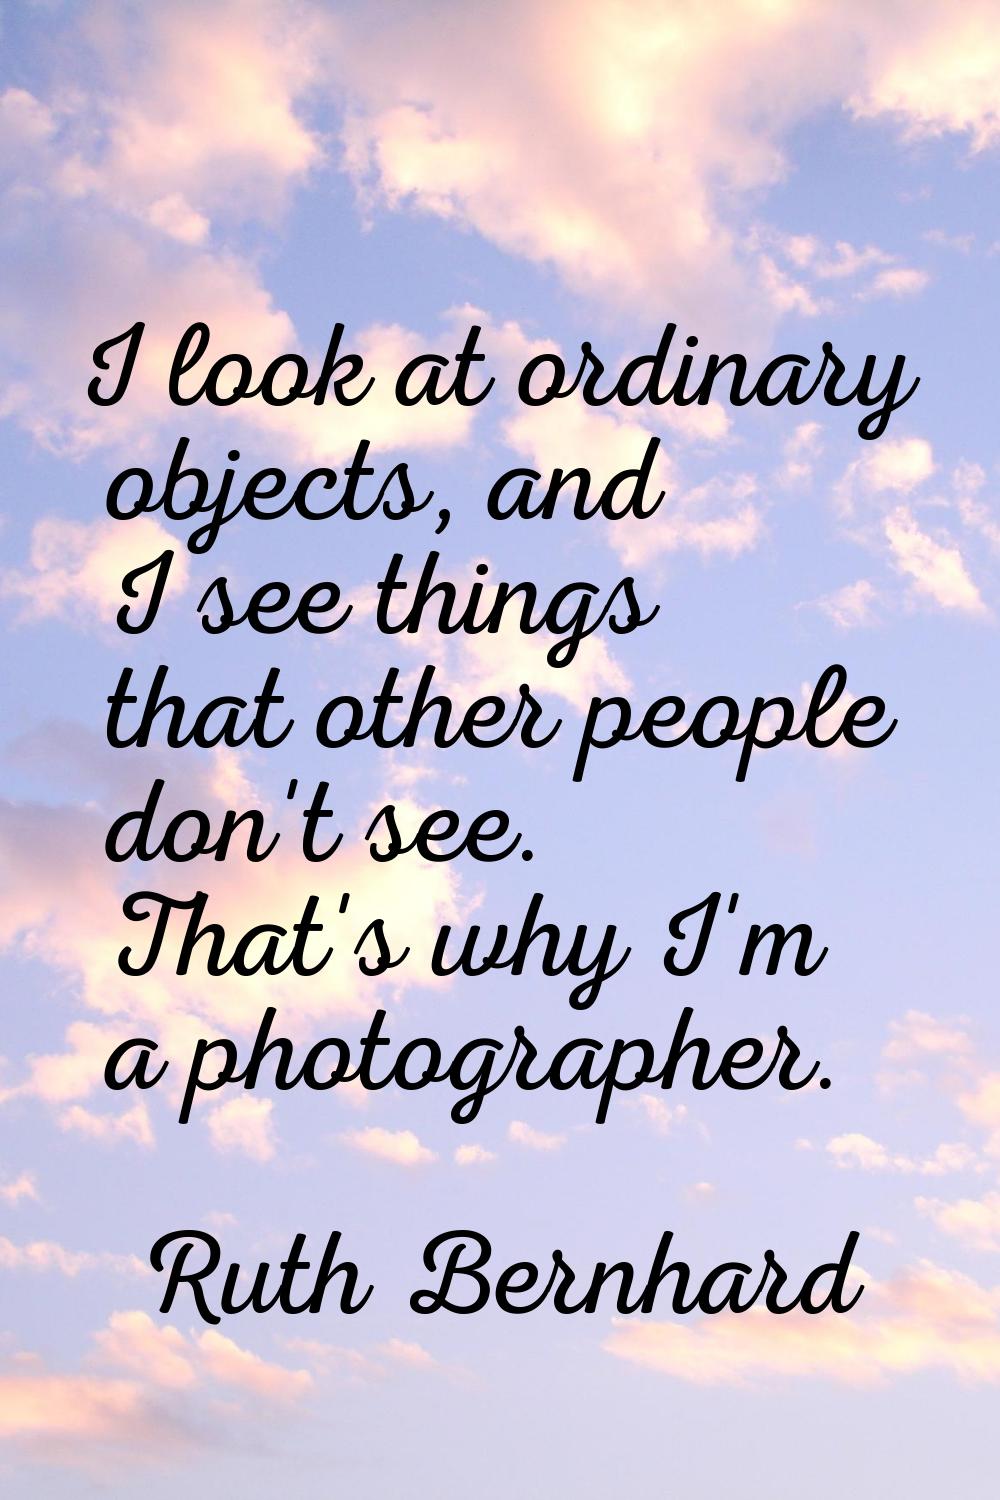 I look at ordinary objects, and I see things that other people don't see. That's why I'm a photogra